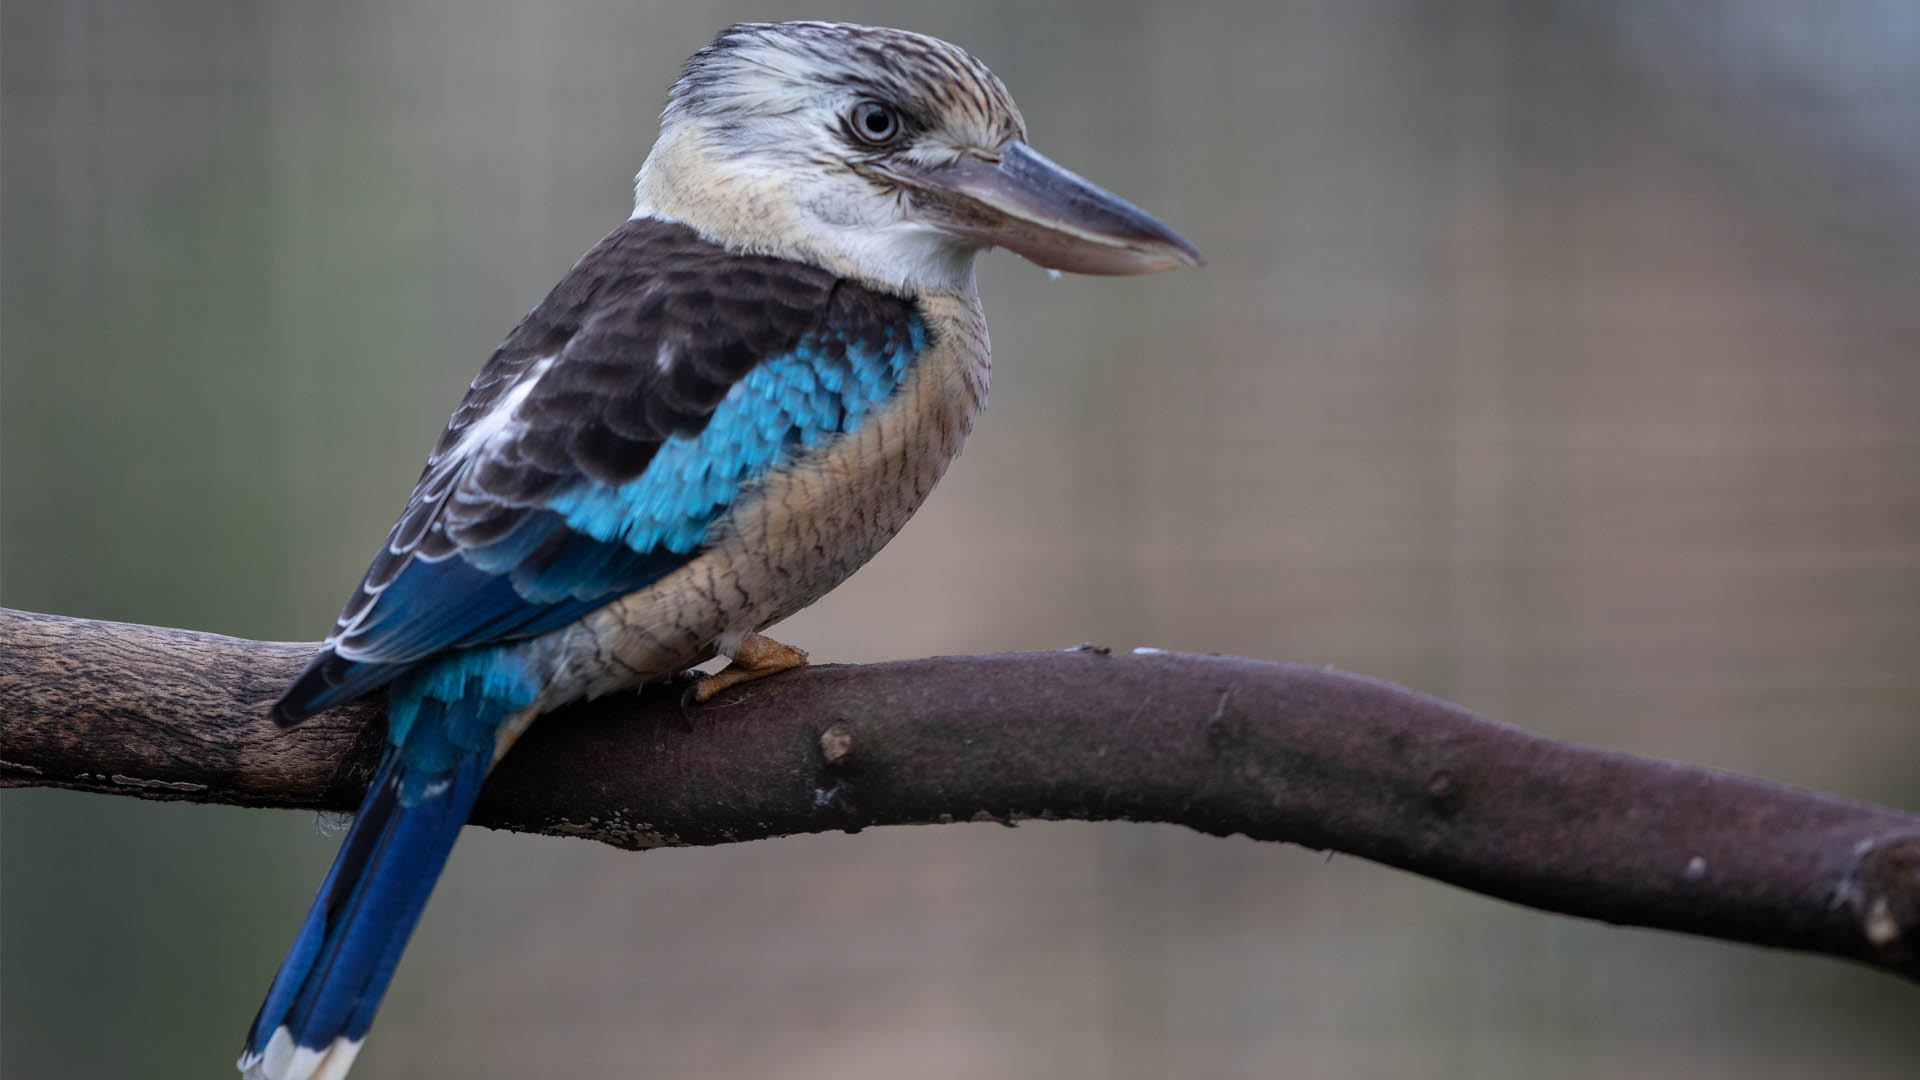 blue-winged At Emerald Park, a kookaburra is perched on a tree branch